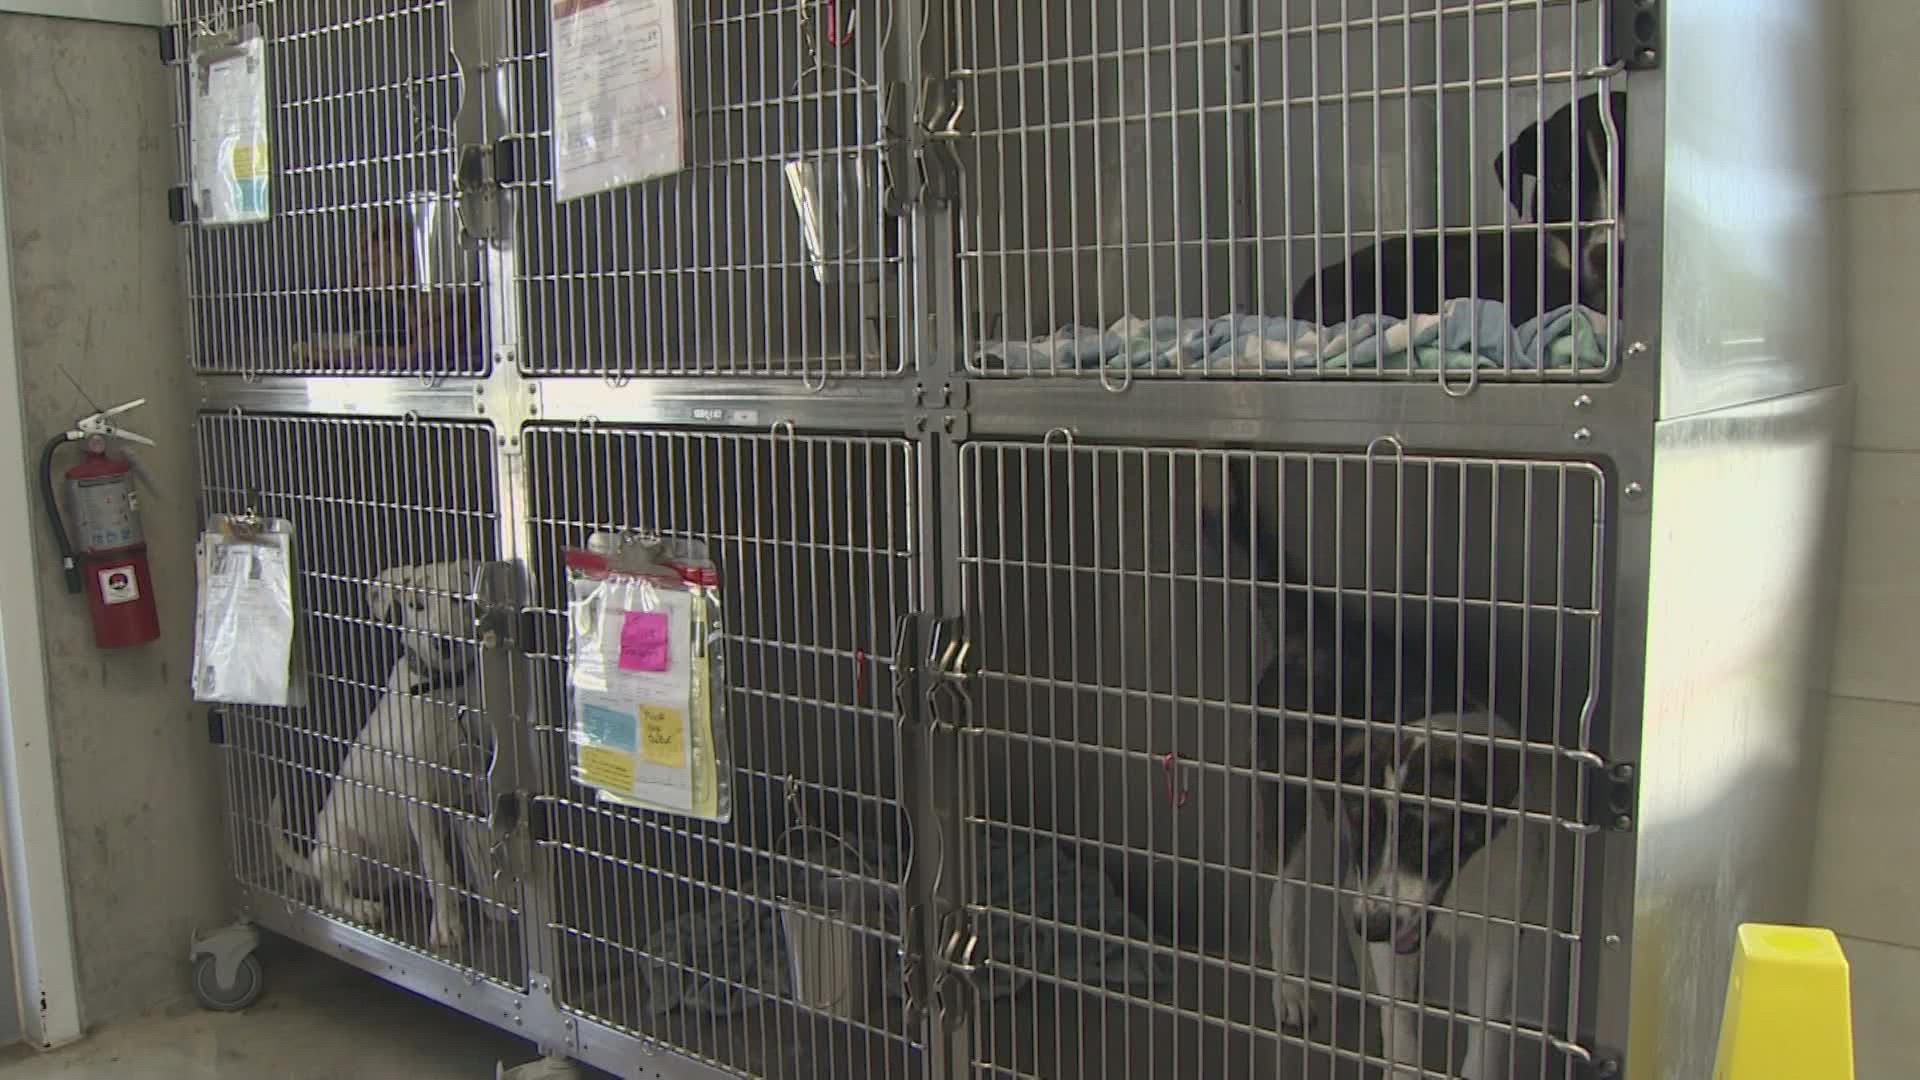 "We're doing everything it can we can to get these animals out of the shelter alive," said Brandon Bennett, the Fort Worth code compliance director